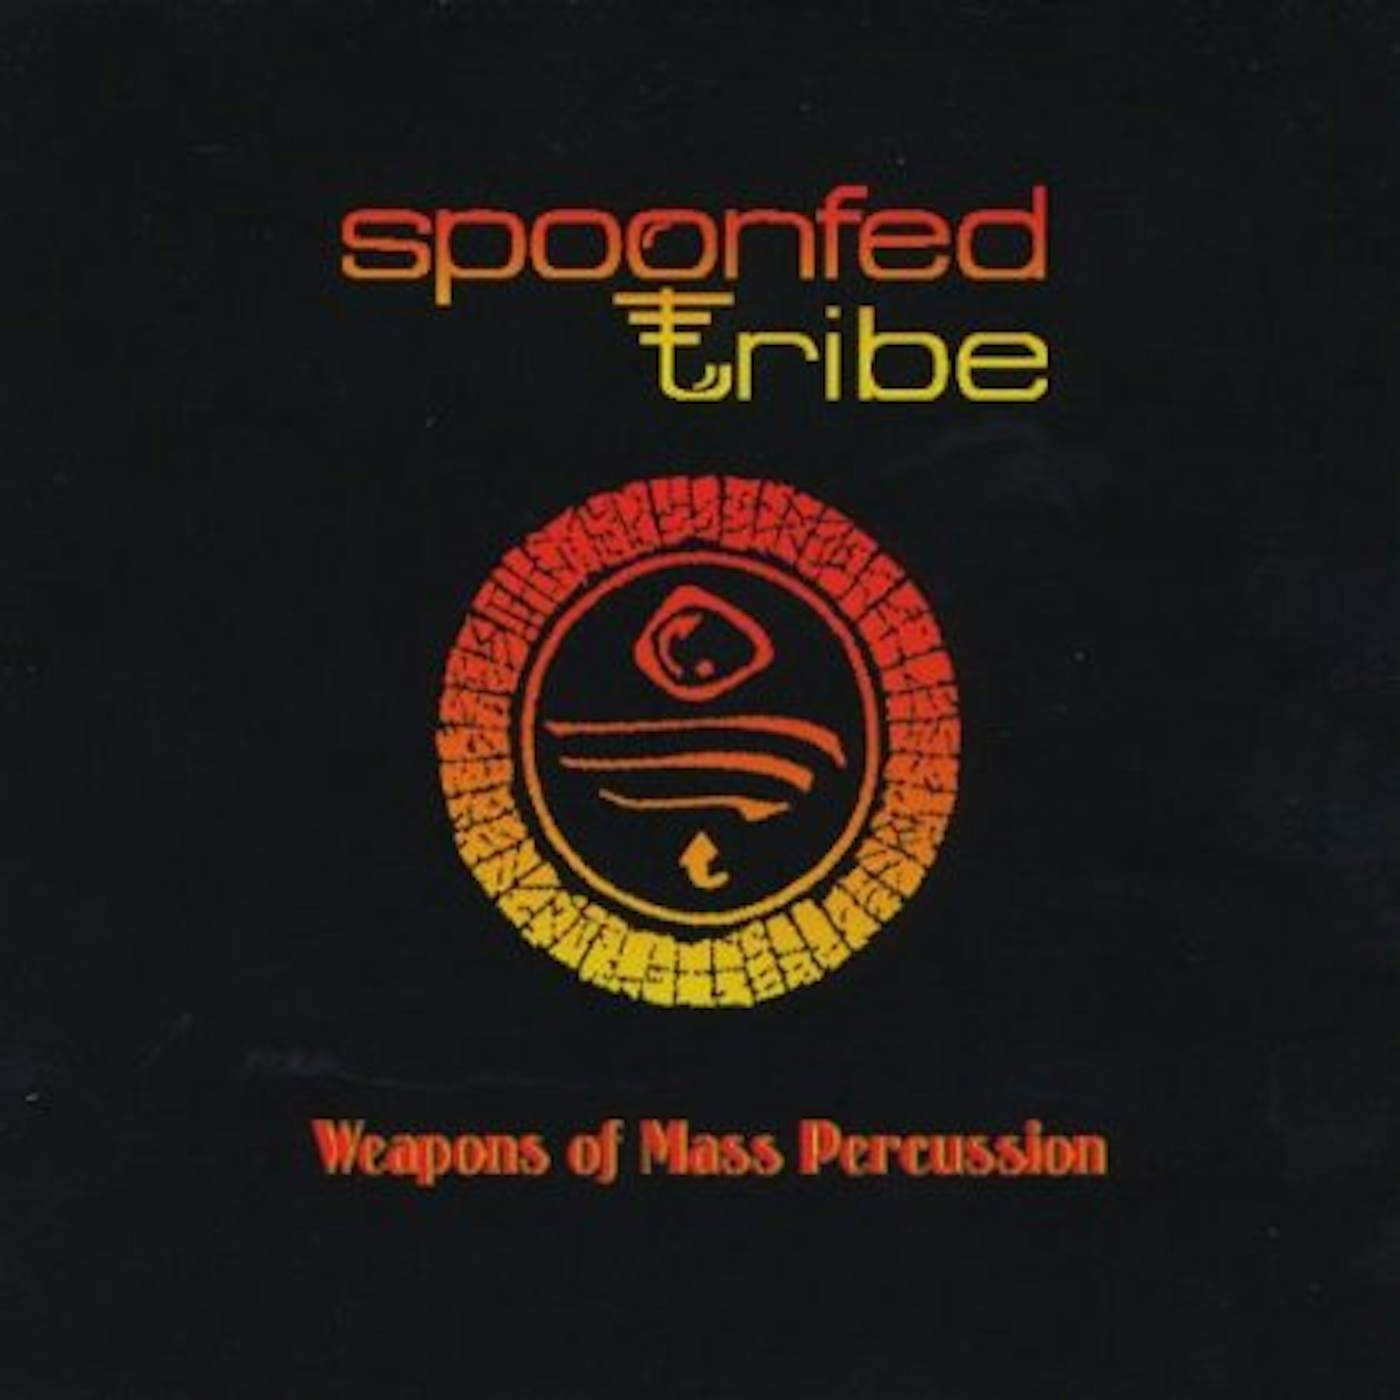 Spoonfed Tribe WEAPONS OF MASS PERCUSSION CD